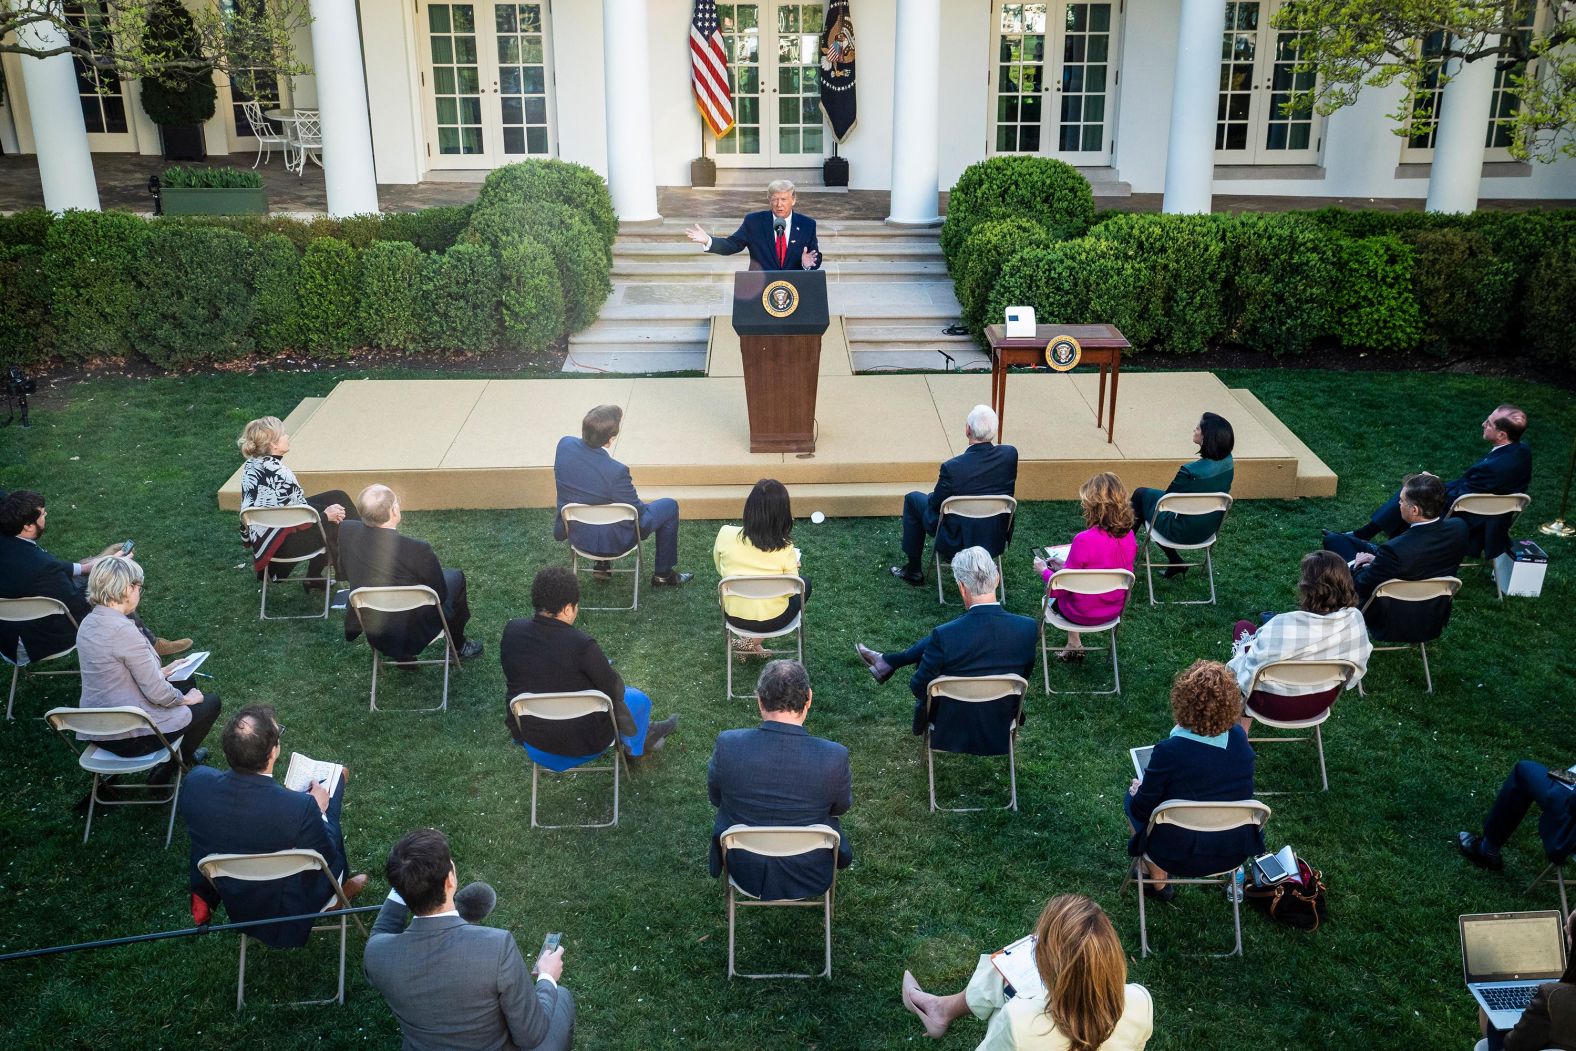 Trump speaks to reporters in the White House Rose Garden on March 30.